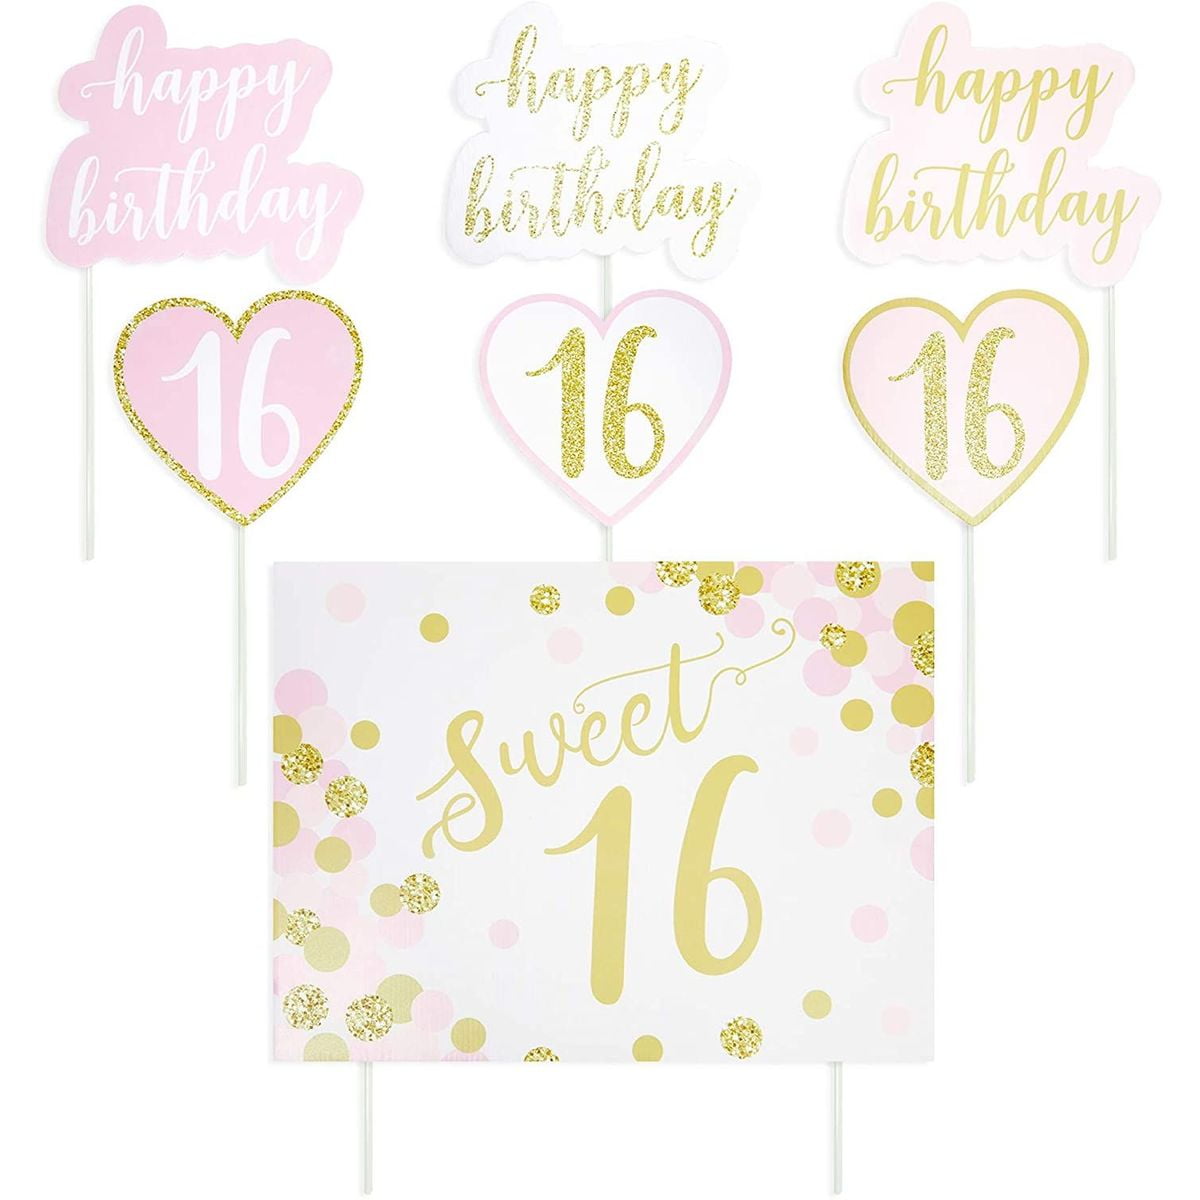 WATINC Happy 16th Birthday Yard Sign with Metal Stakes Double Sided Printing Large Waterproof Lawn Signs Gold White Balloons Black Outdoor Party Decorations for 16 Years Old Boys Girls 11.8 x 16.9 in